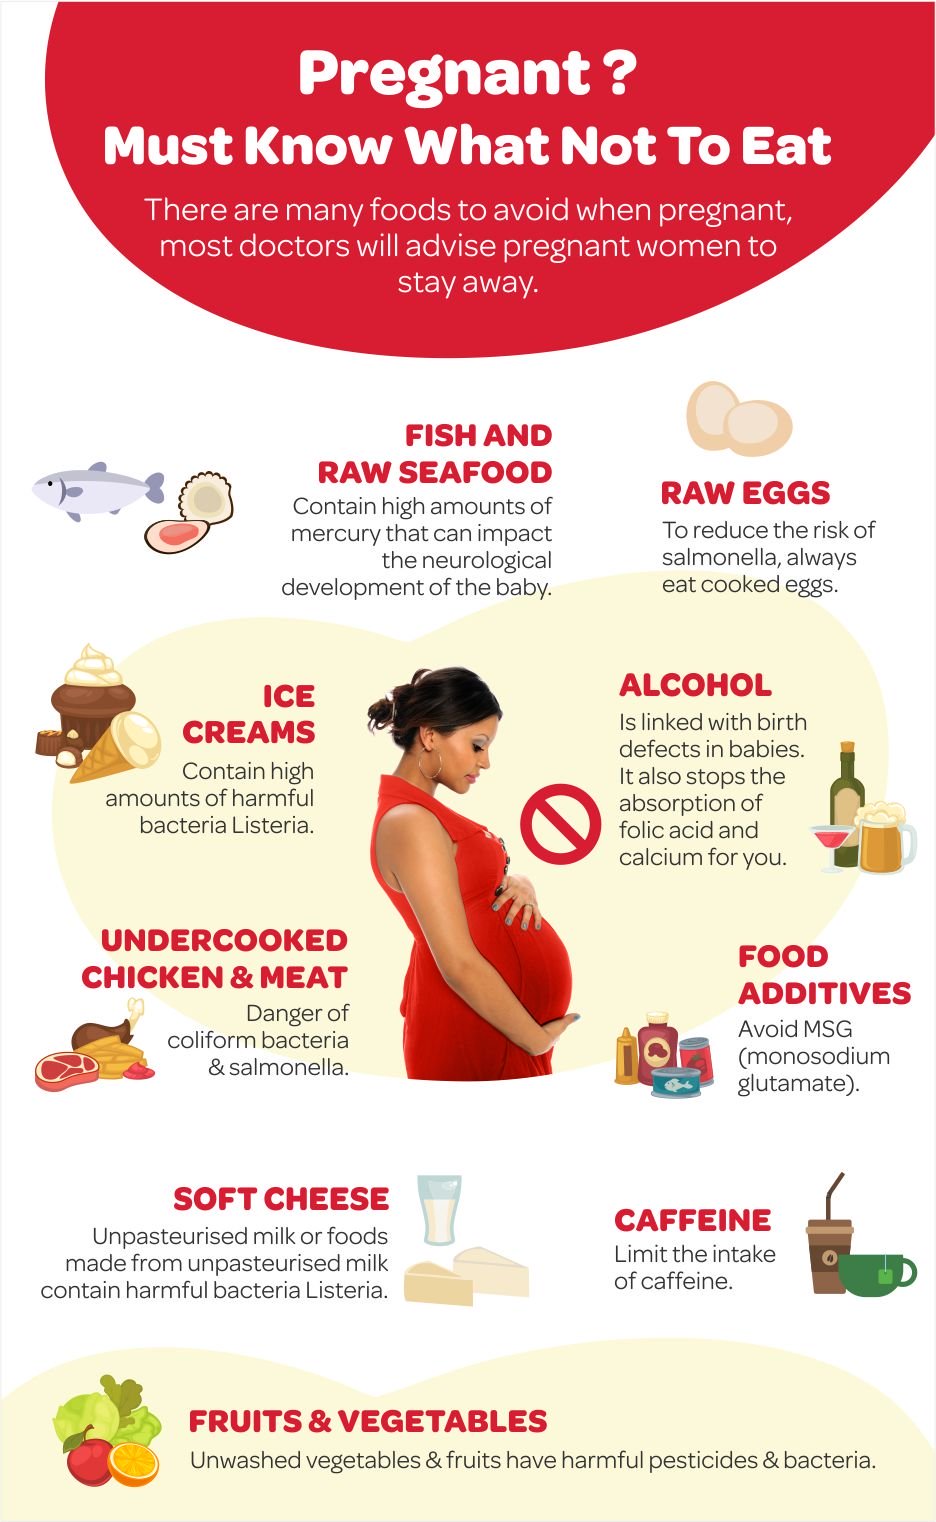 Pregnancy? Know What Not to Eat